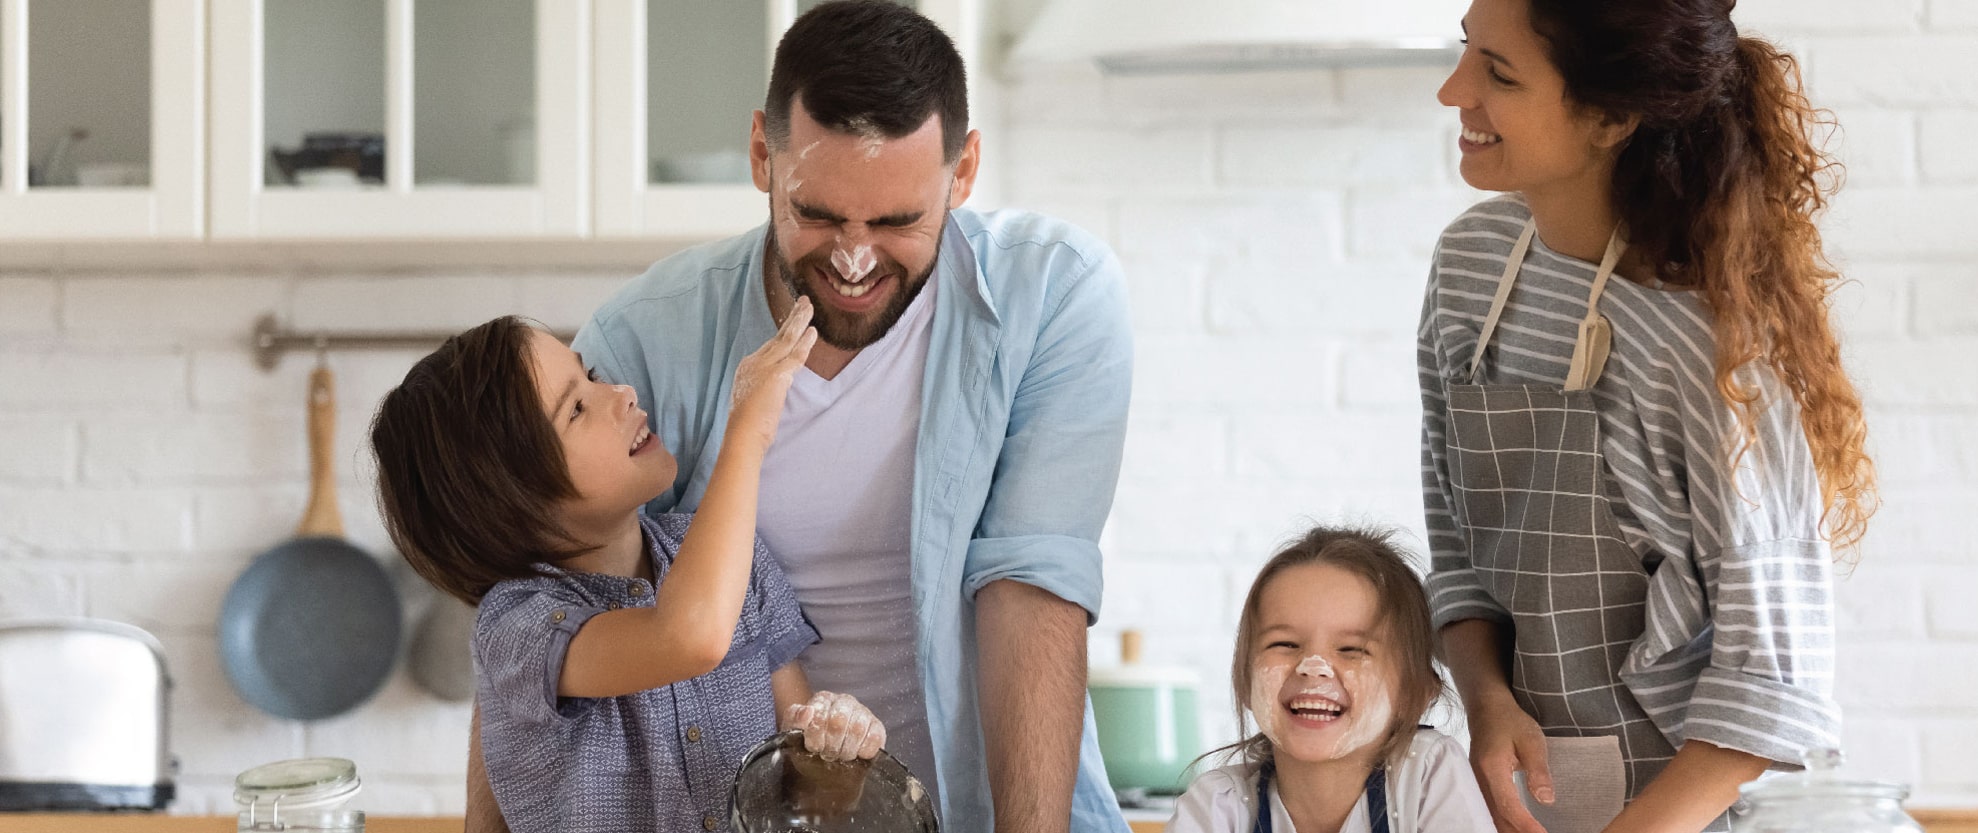 Family baking together in kitchen and laughing